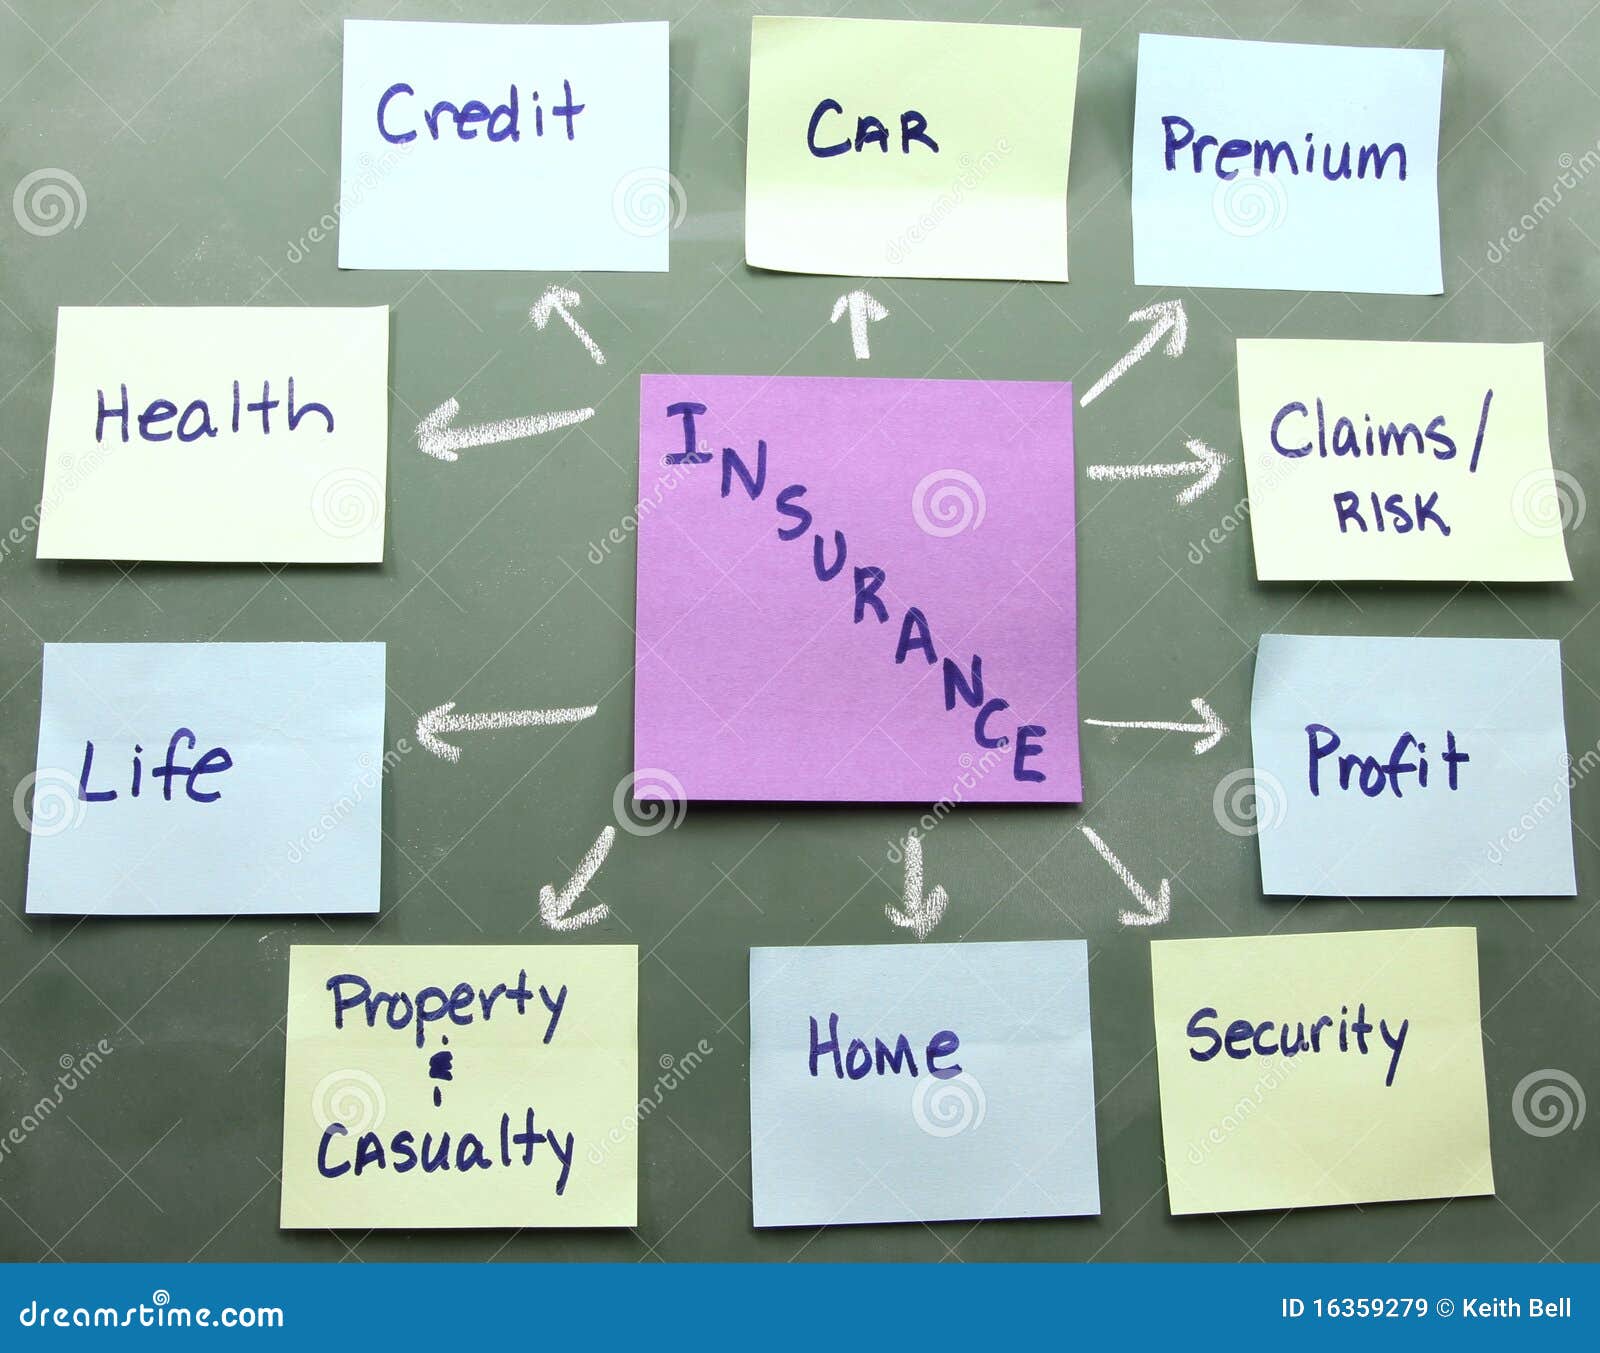 stock broker indemnity insurance policy